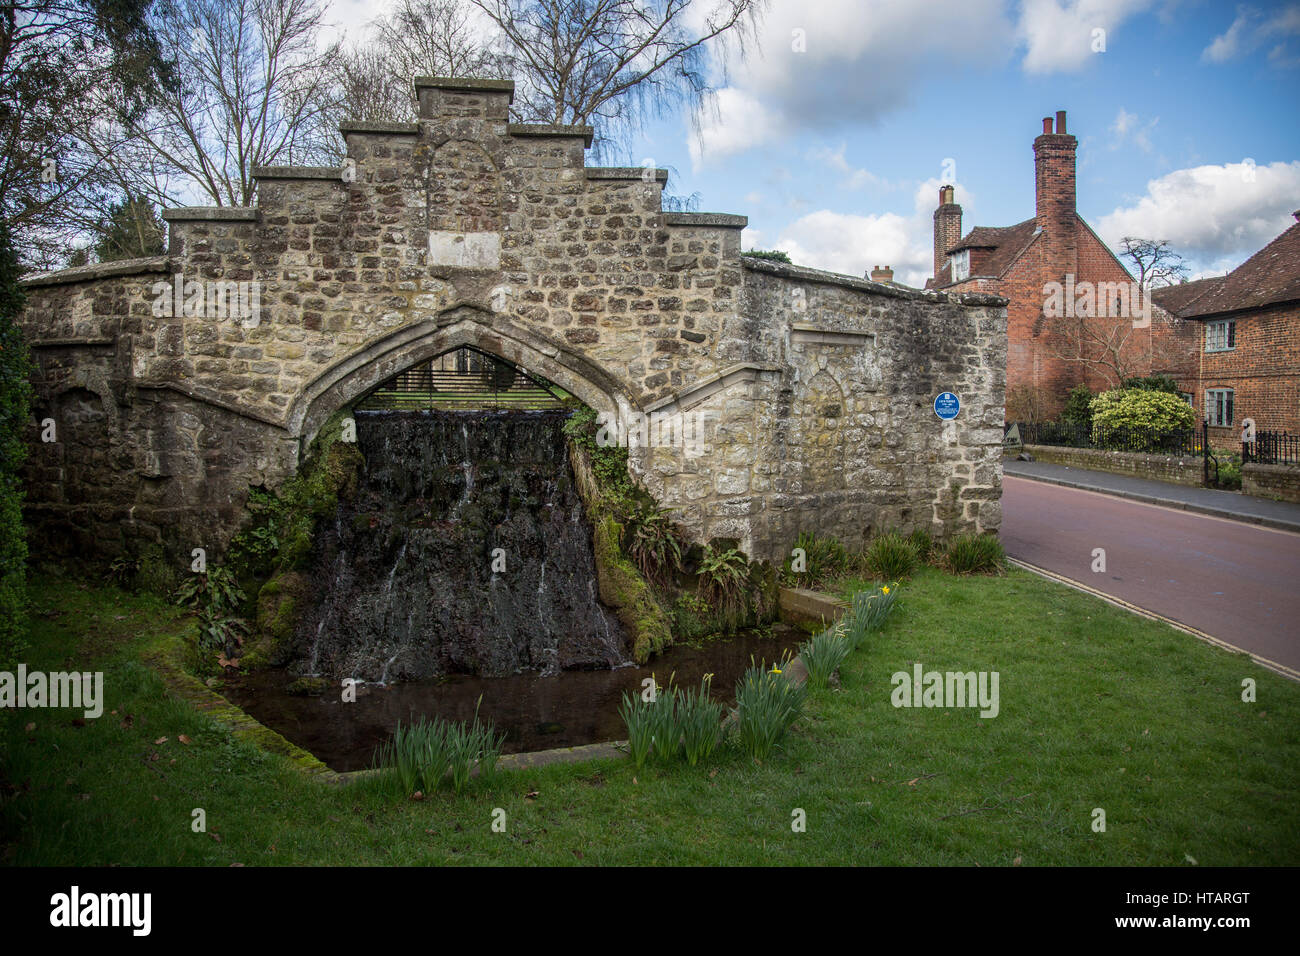 General view of West Malling in Kent, UK. Stock Photo